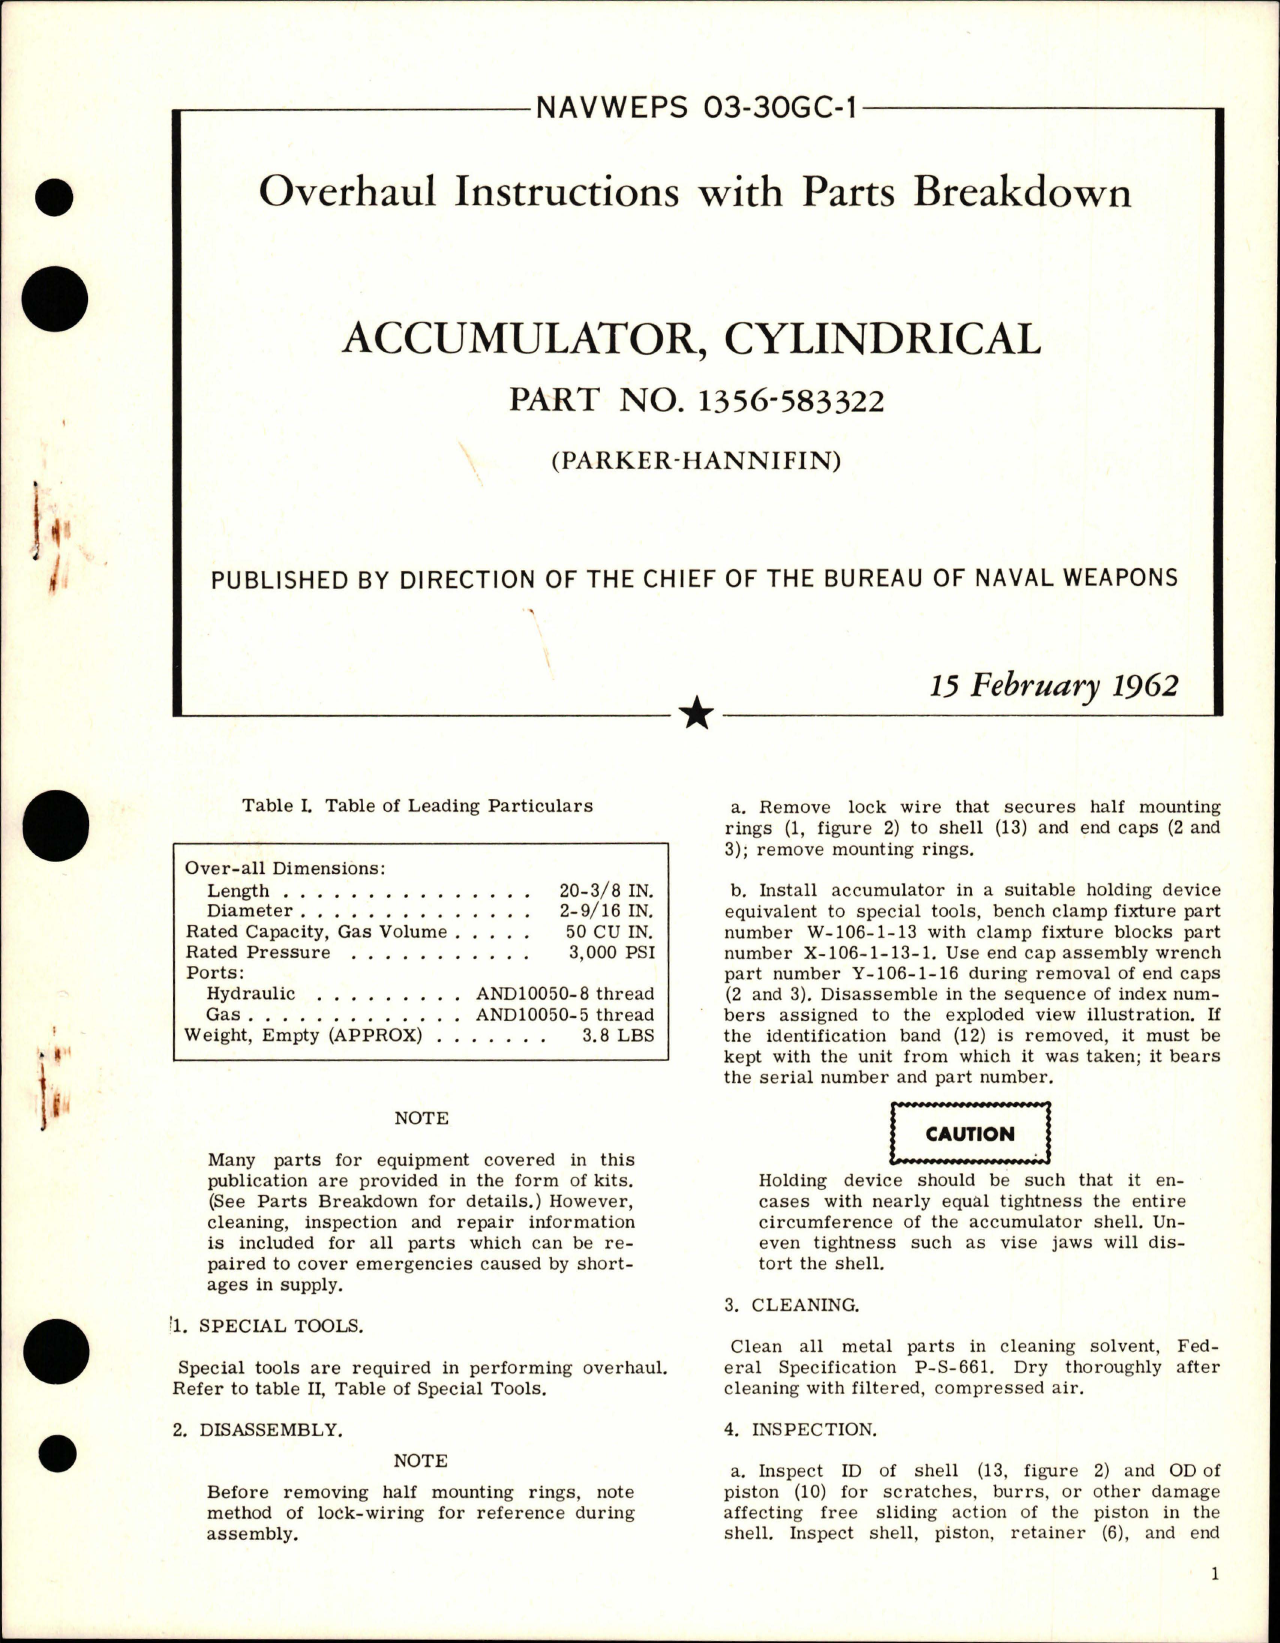 Sample page 1 from AirCorps Library document: Overhaul Instructions with Parts Breakdown for Cylindrical Accumulator - Part 1356-583322